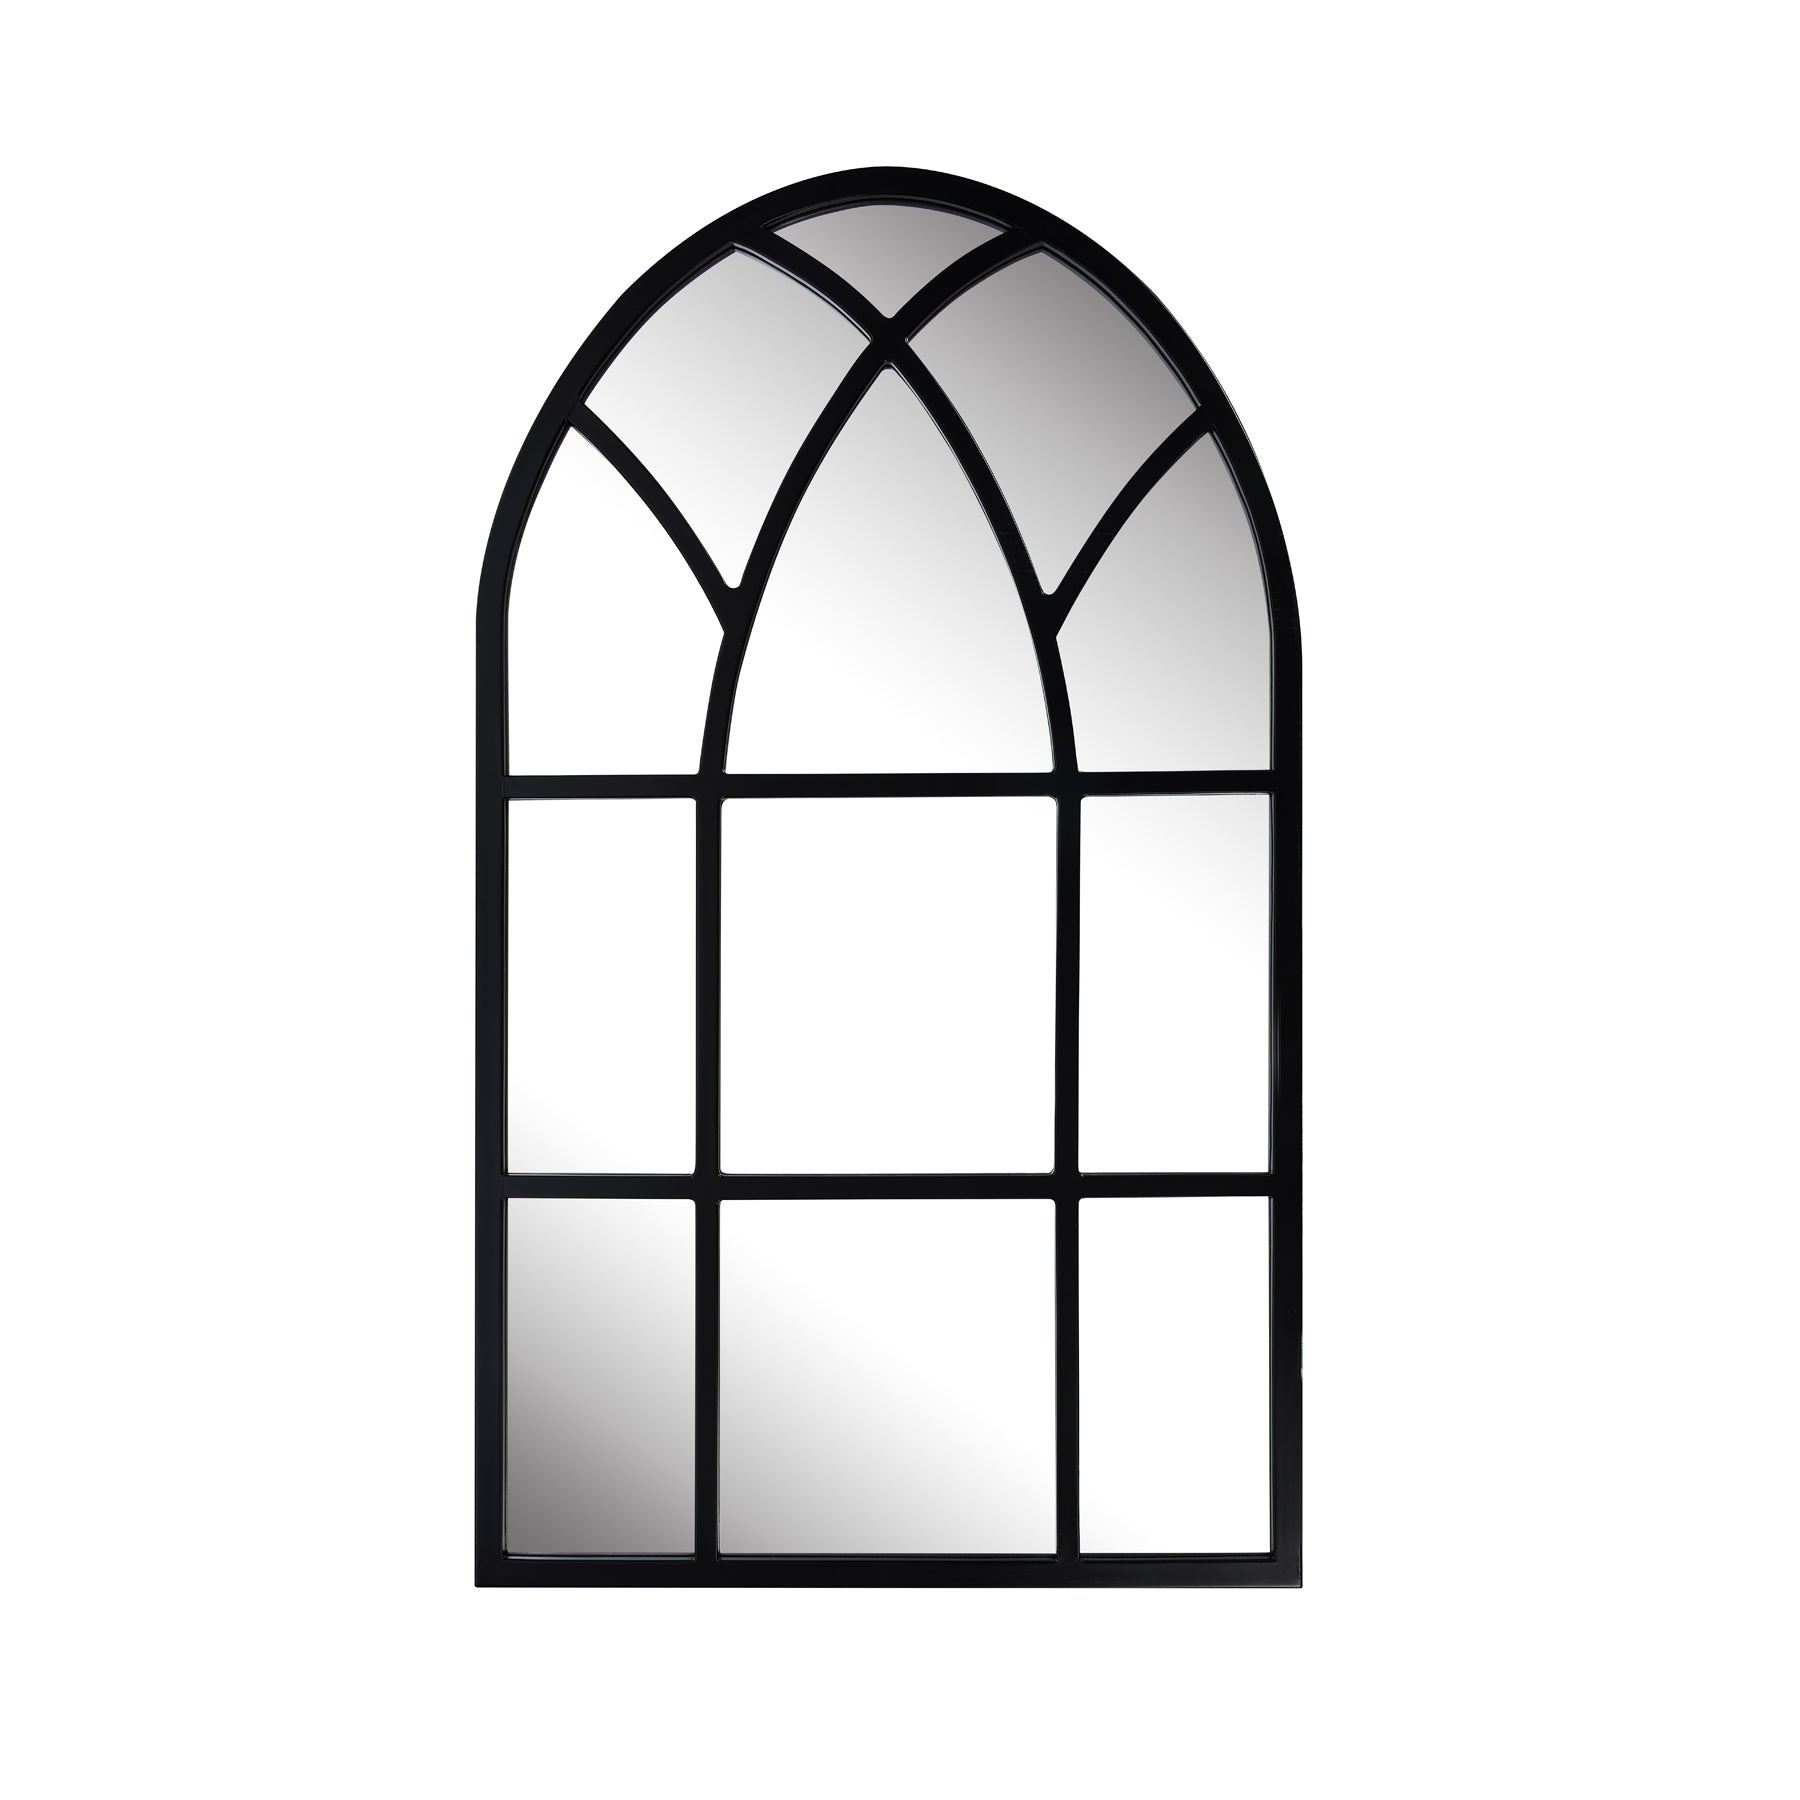 Cathedral Arch Mirror - Black - Paramount Mirrors and Prints